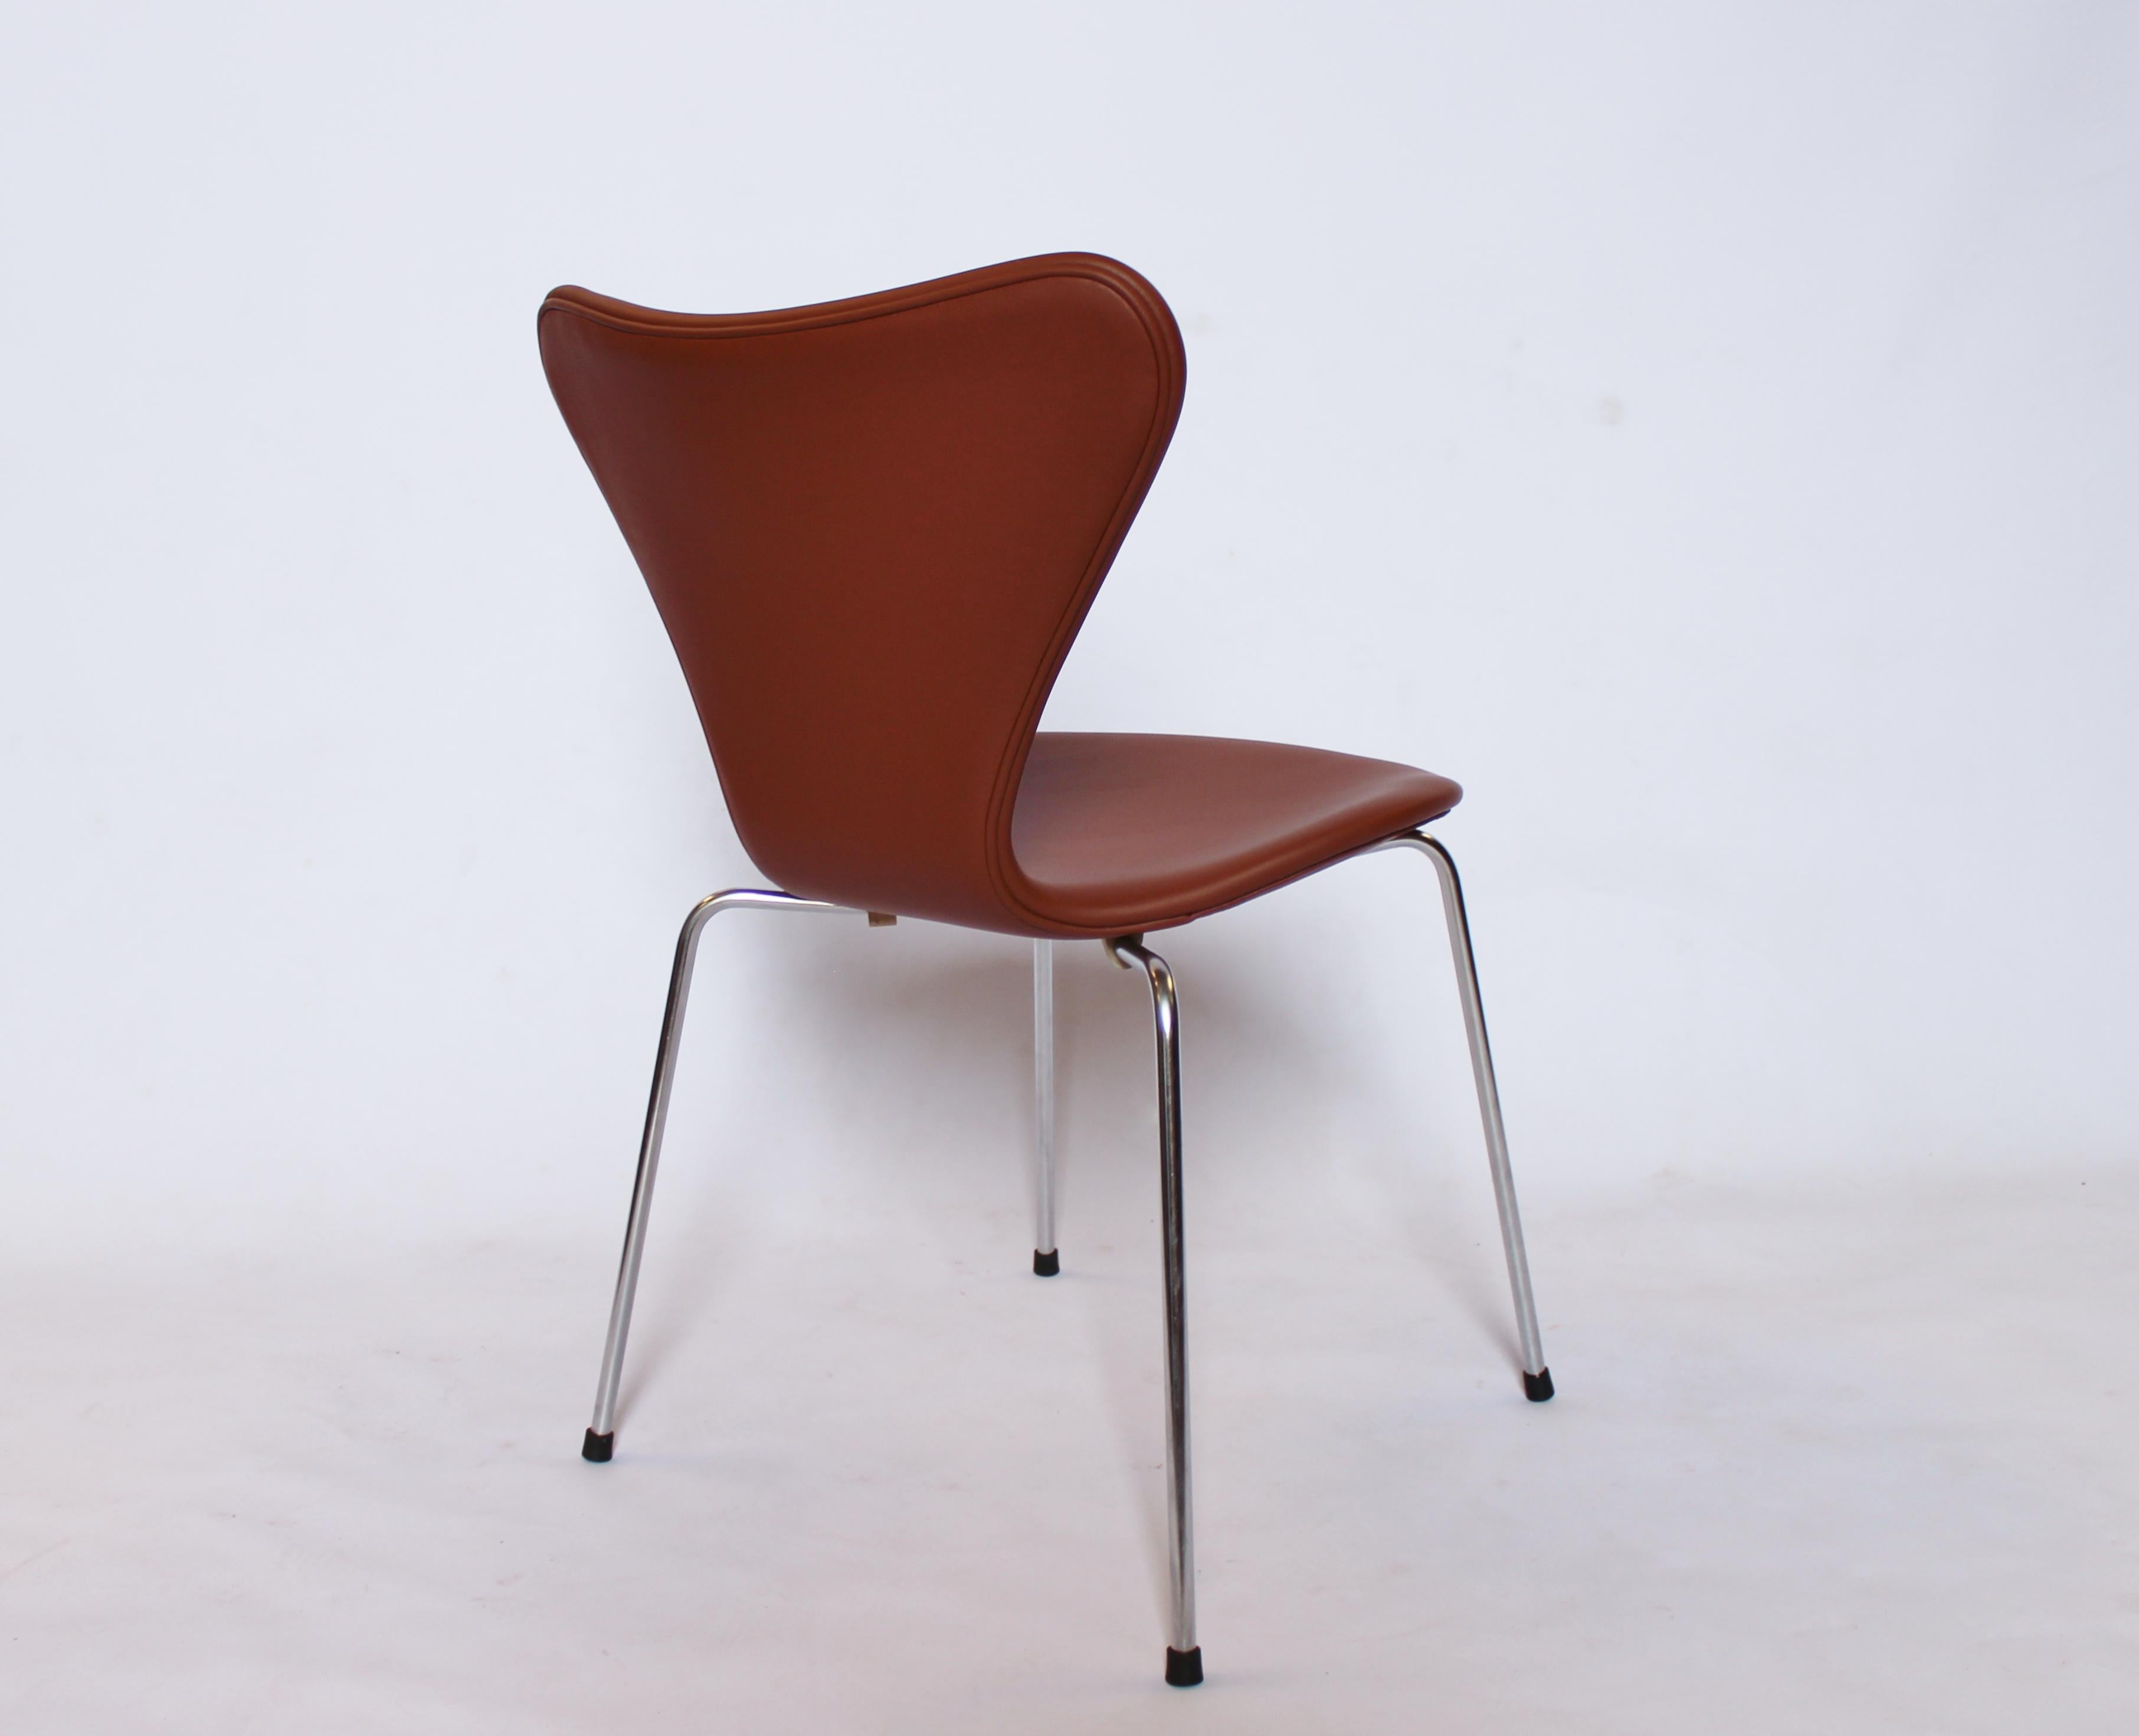 Danish Set of Four Series 7 Chairs, Model 3107, by Arne Jacobsen and Fritz Hansen, 1967 For Sale